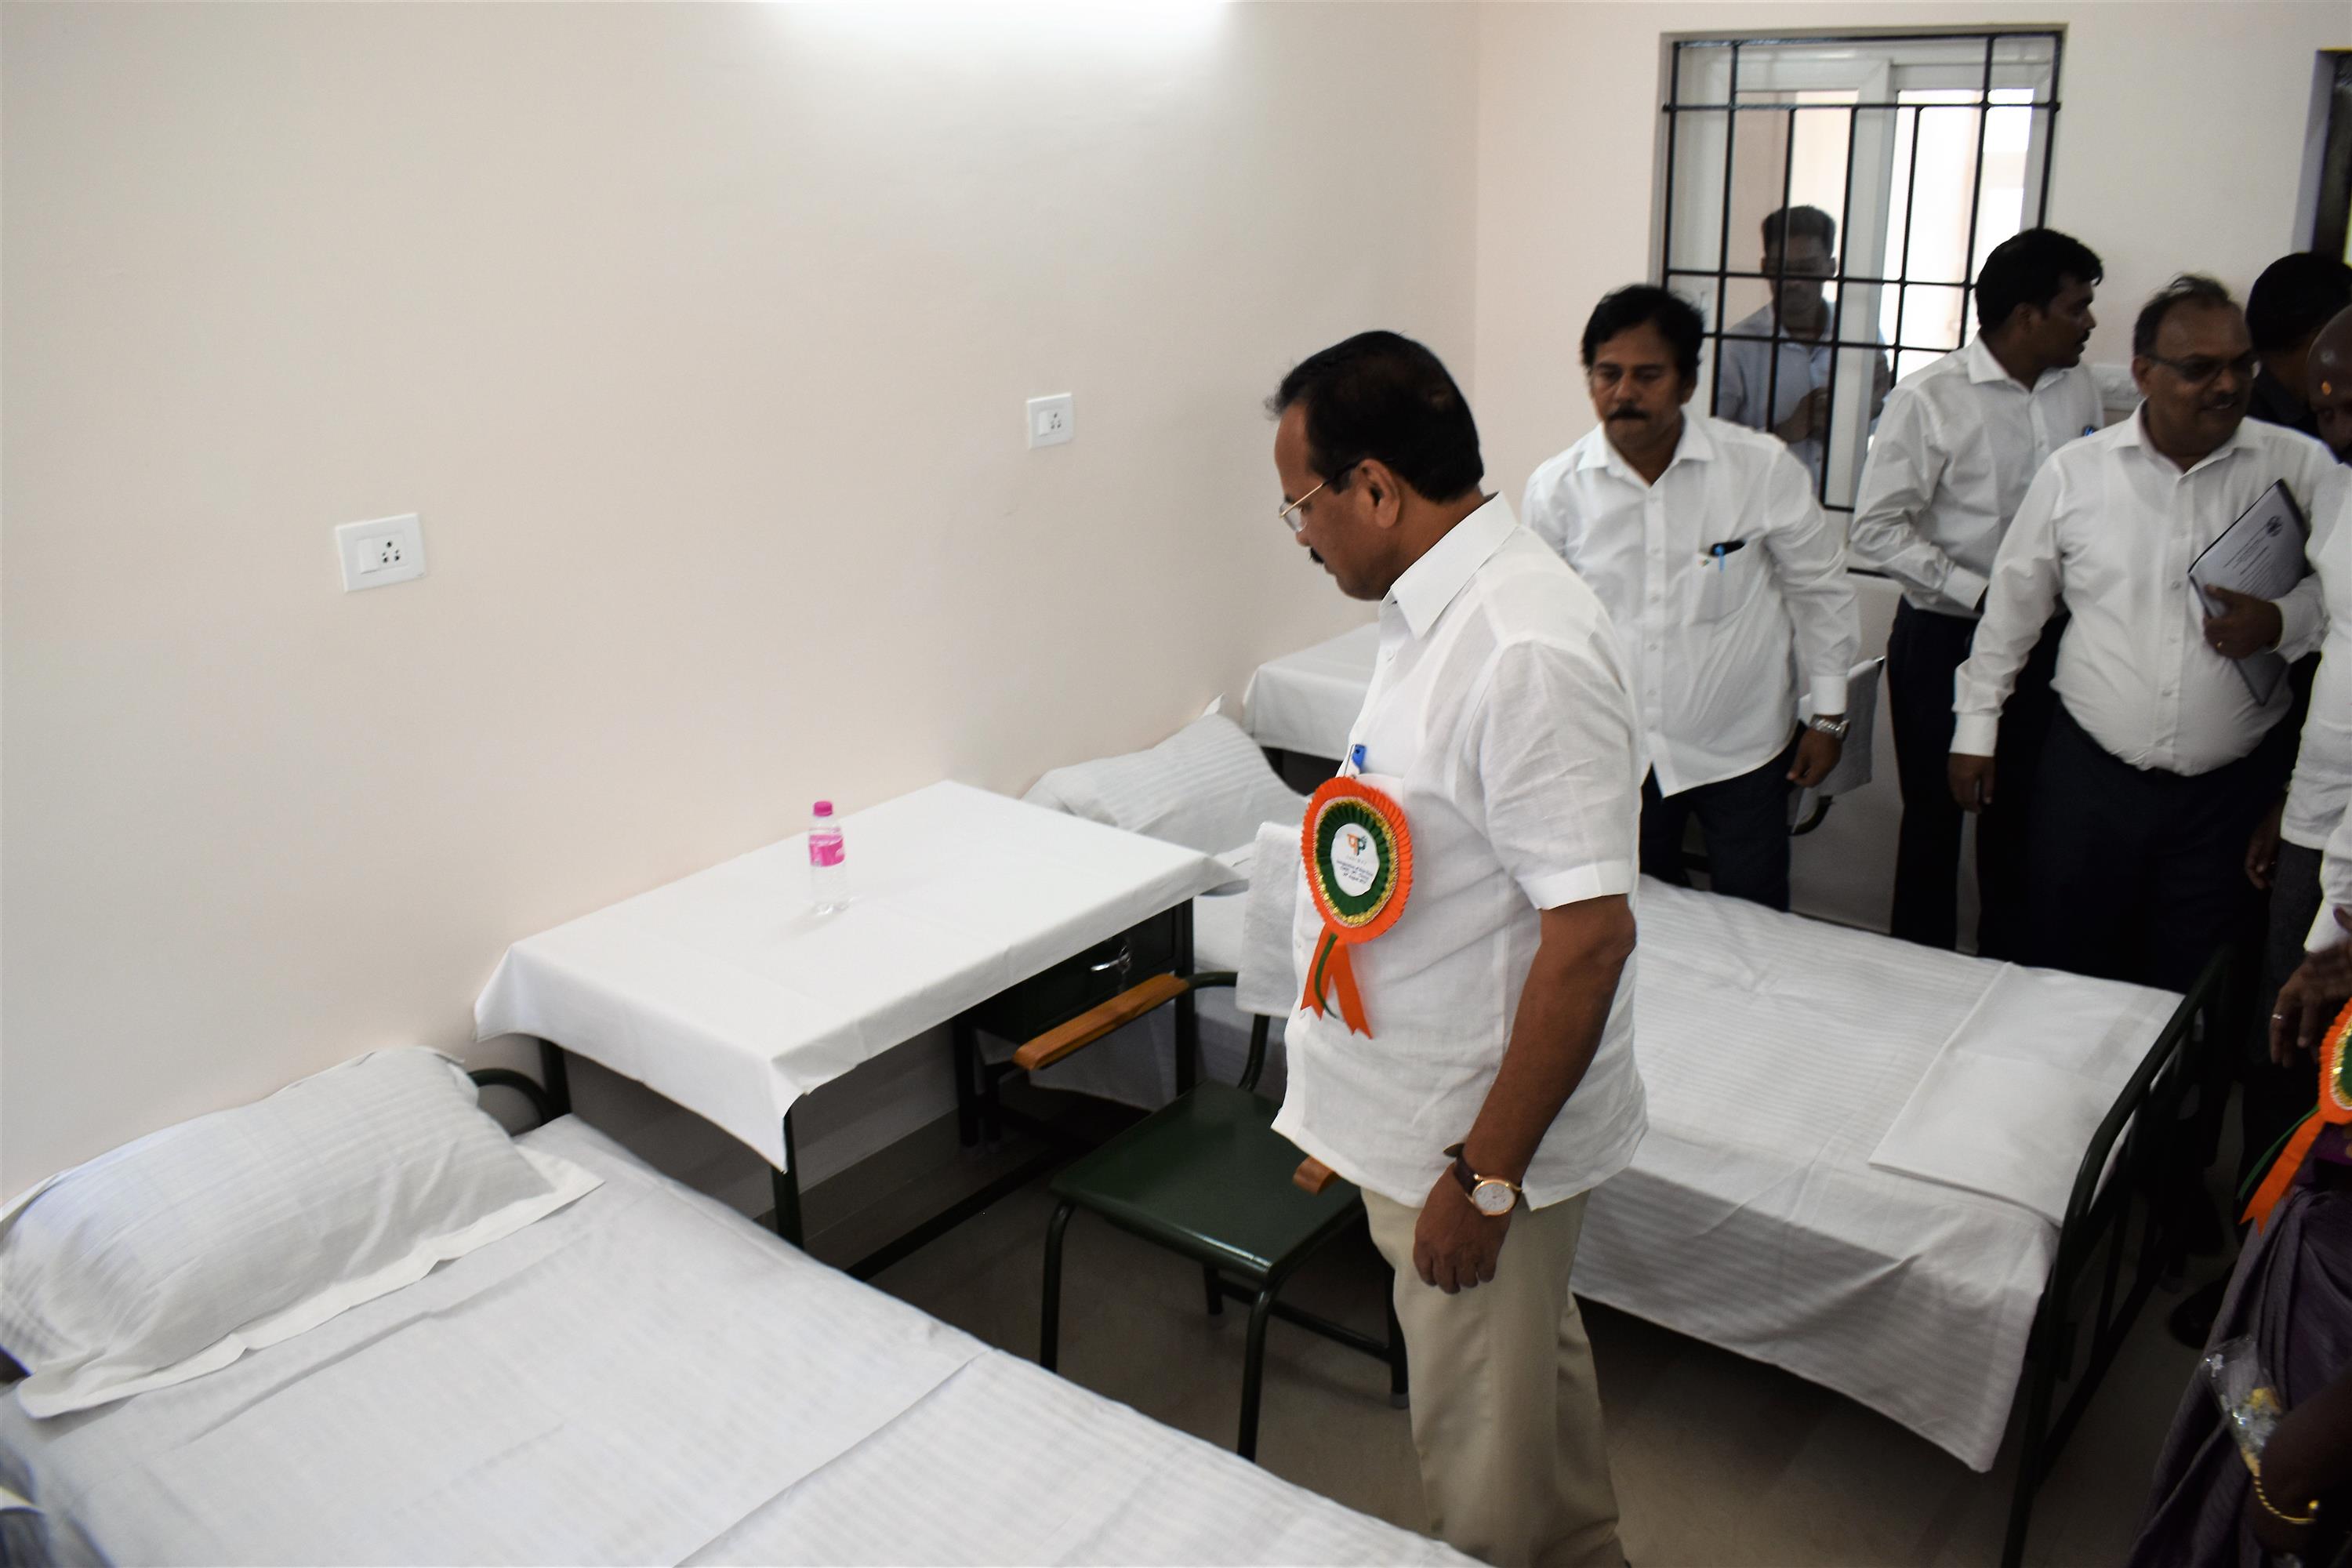 Shri. D. V. Sadananda Gowda, Union Minister for Chemicals & Fertilizers reviewing the various facilities of the Boys Hostel of the CIPET: Institute of Plastics Technology, Deptt. Of Chemicals & Petrochemicals, Ministry of Chemicals & Fertilizers at Chennai, today (August 29, 2019)  

